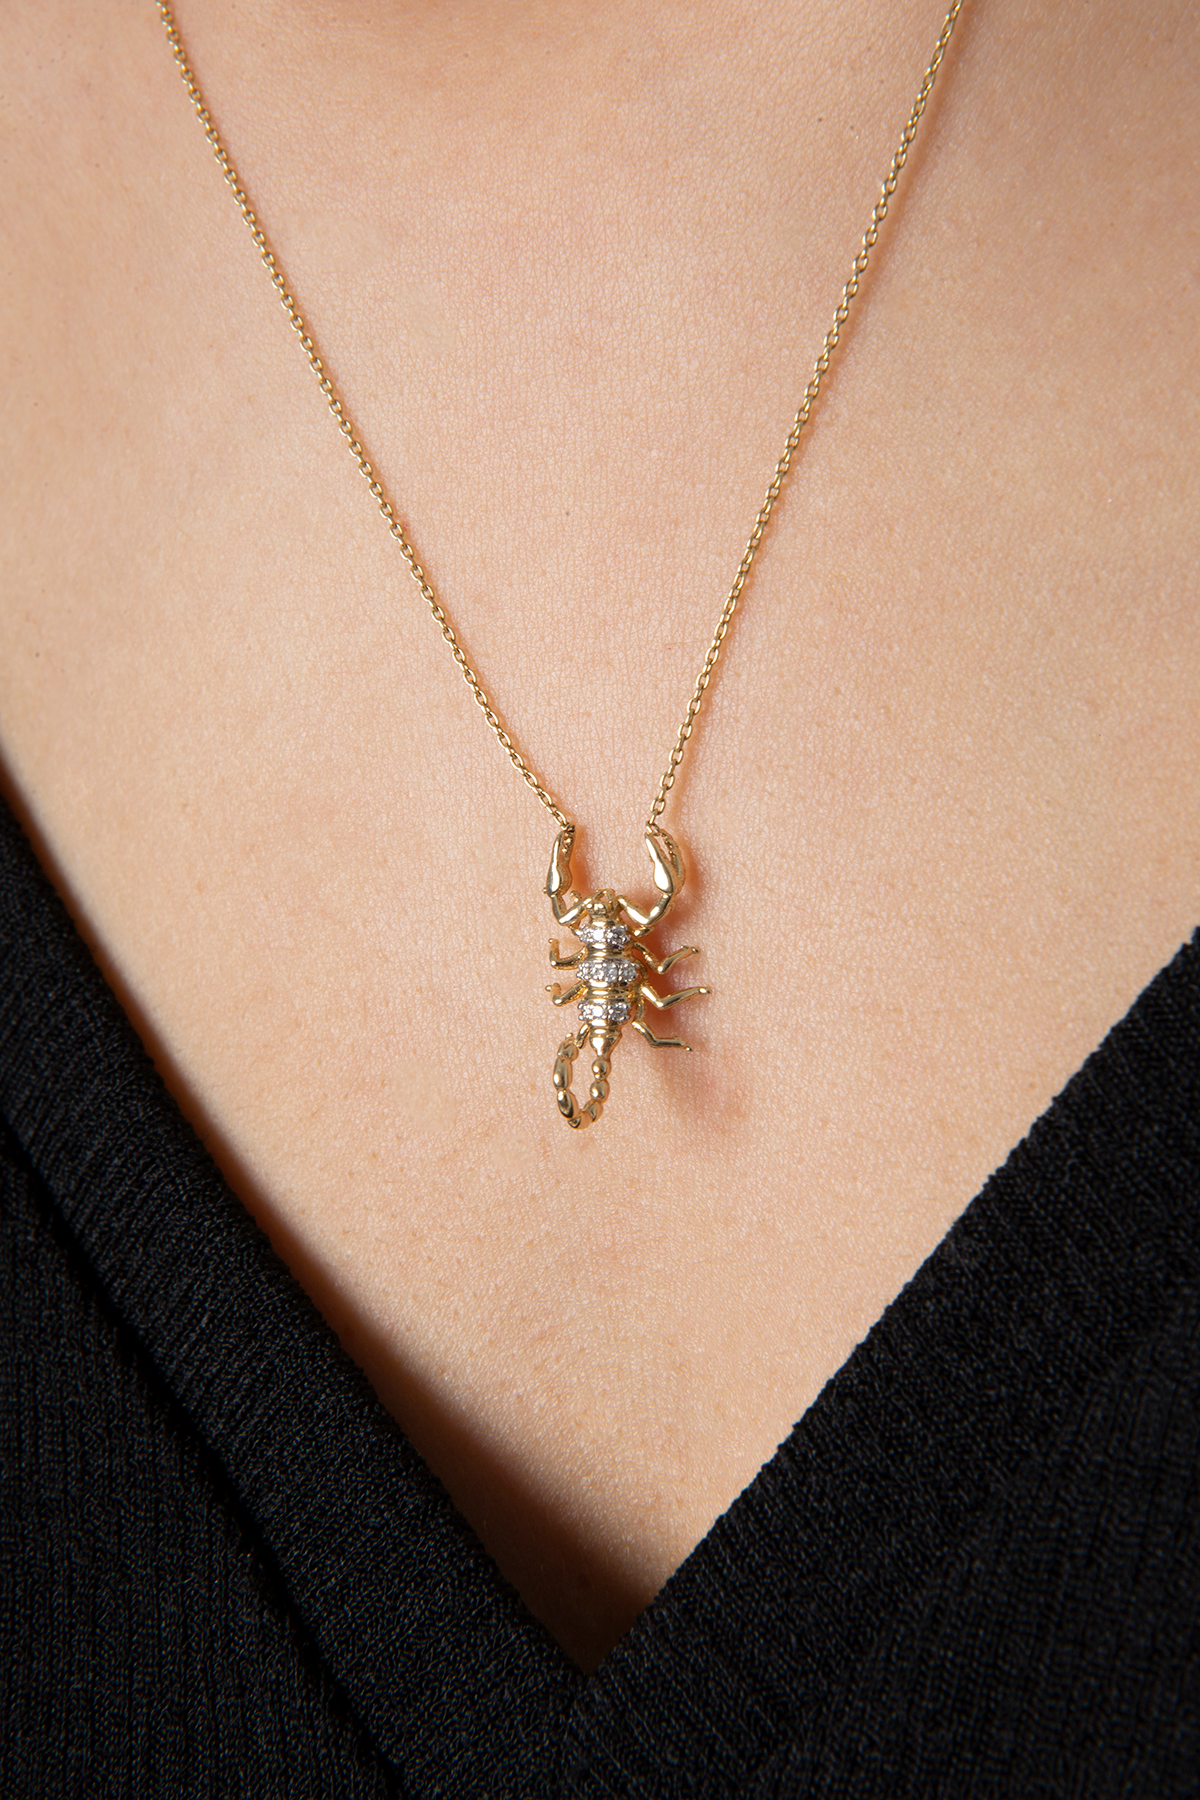 Scorpion Necklace in Yellow Gold - Her Story Shop